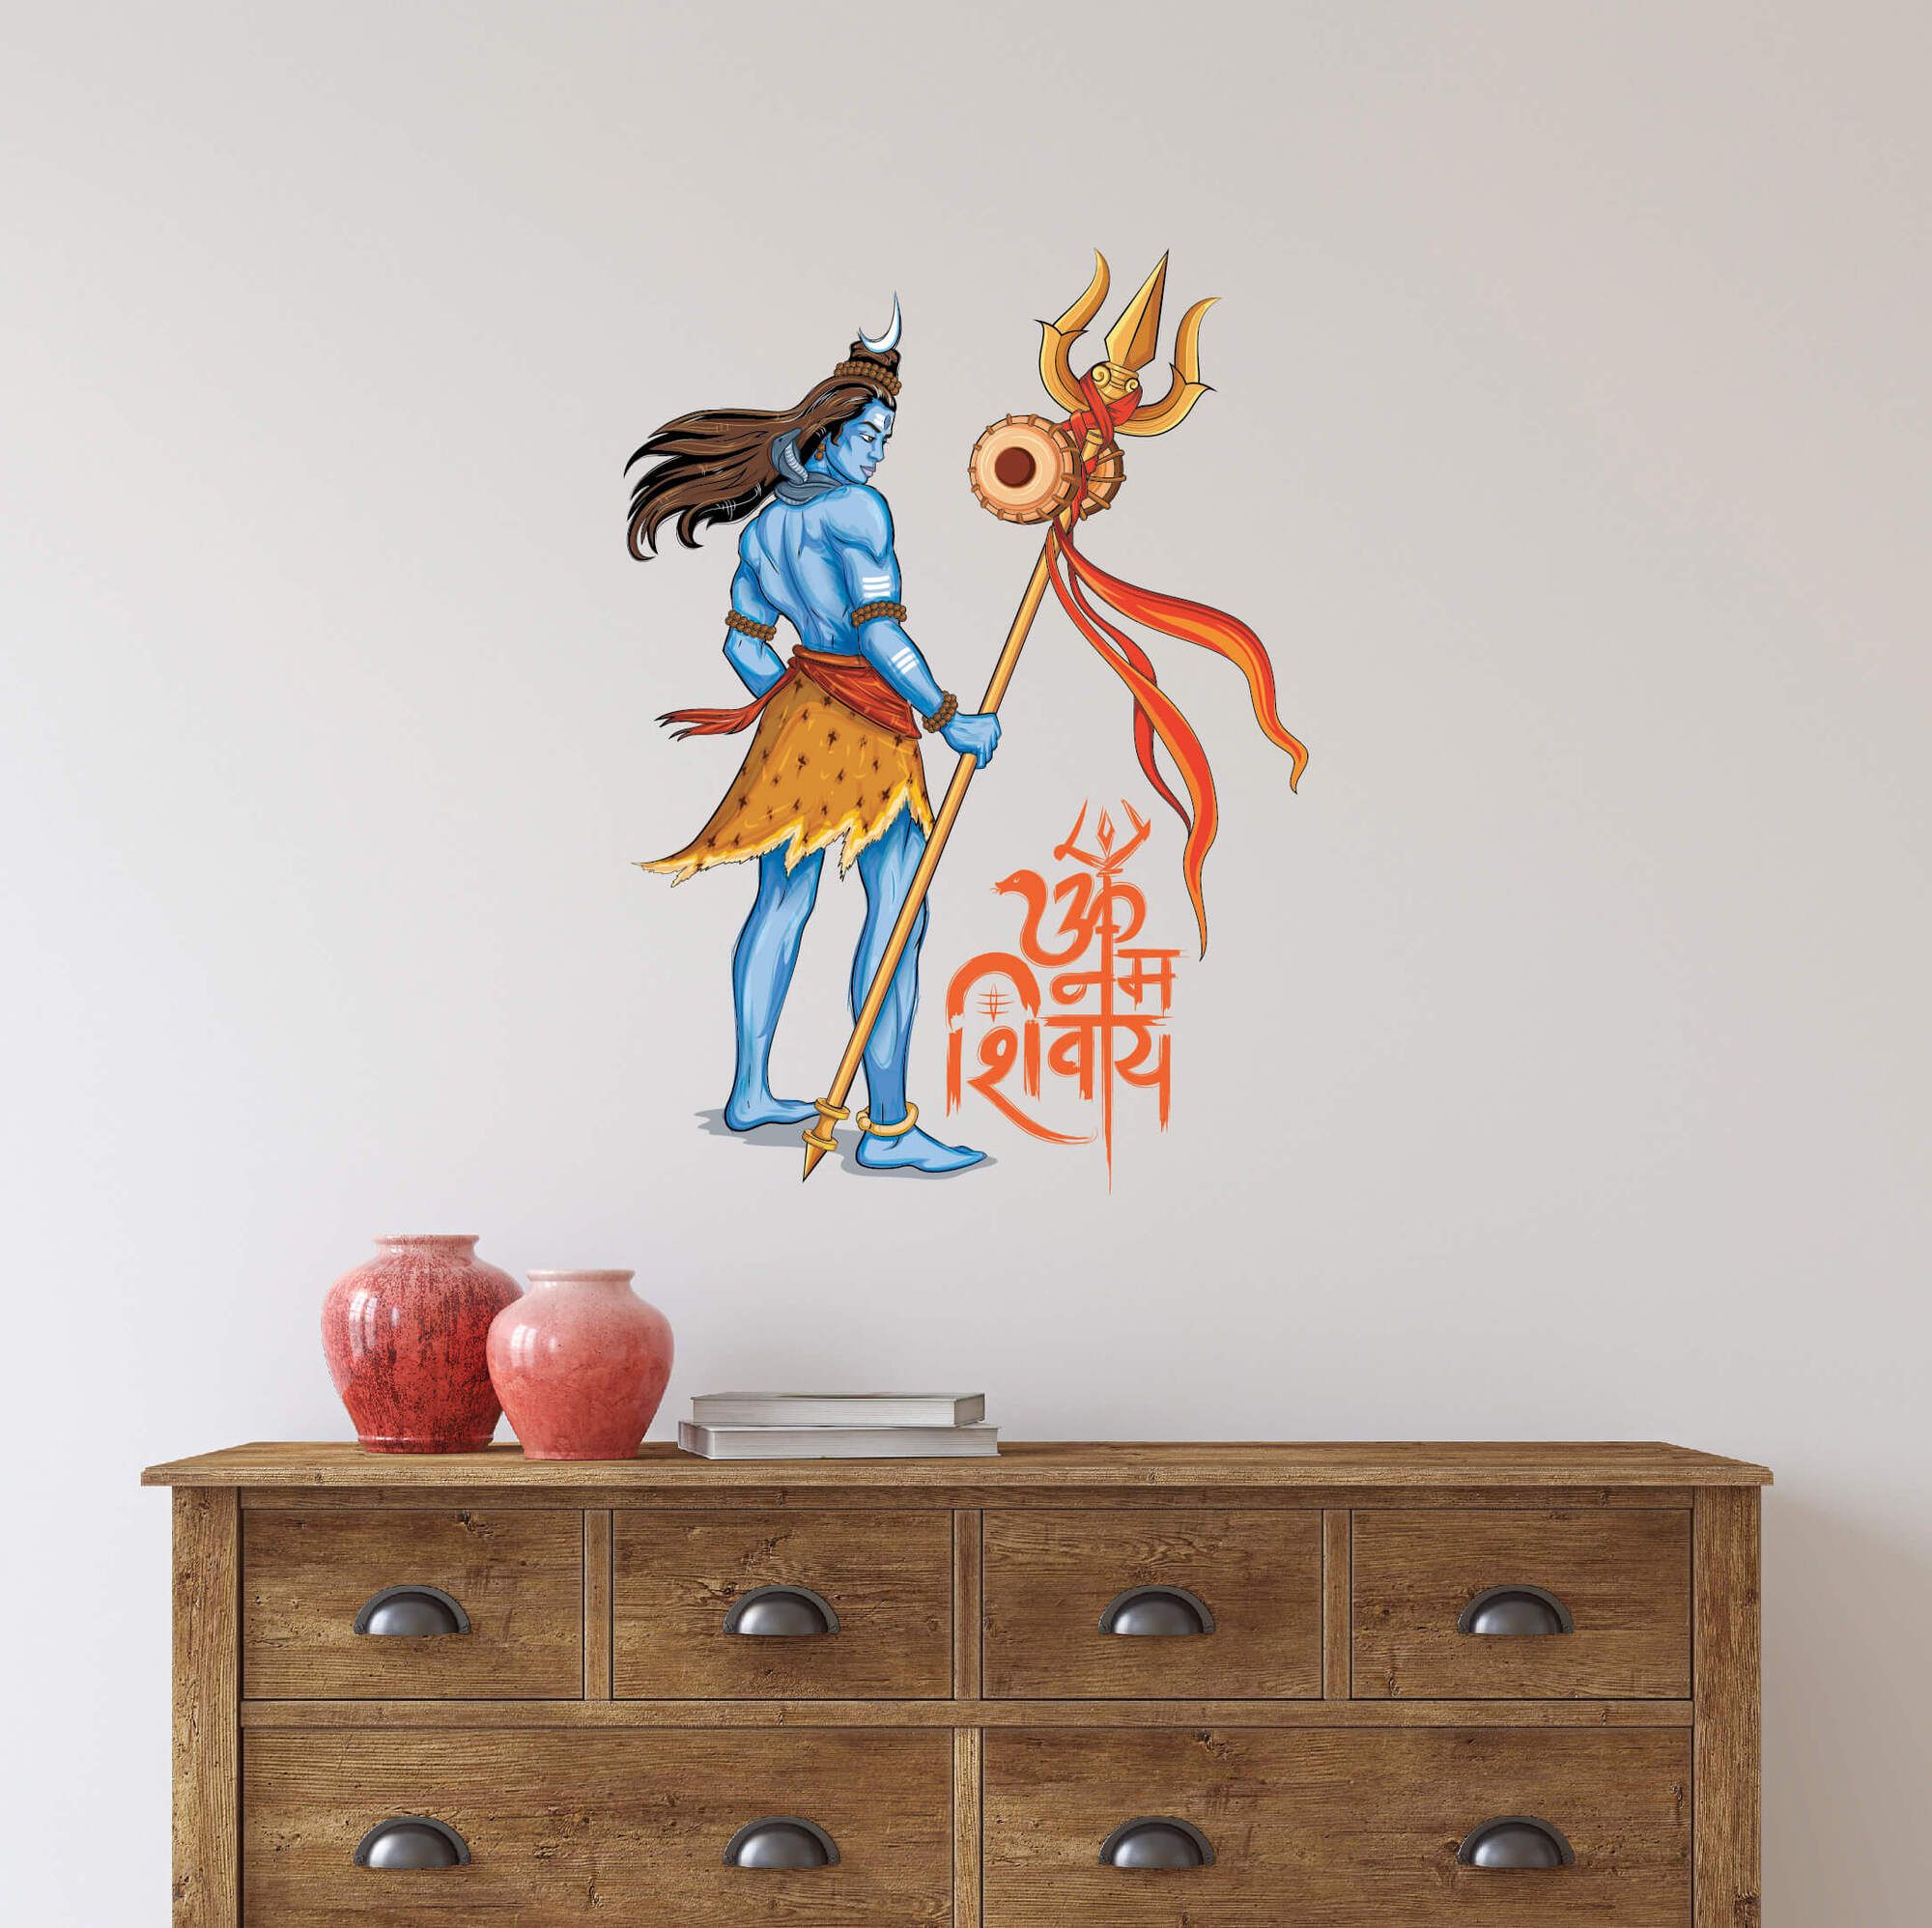 Lord Shiva - Wall Stickers & Decals by Asian Paints